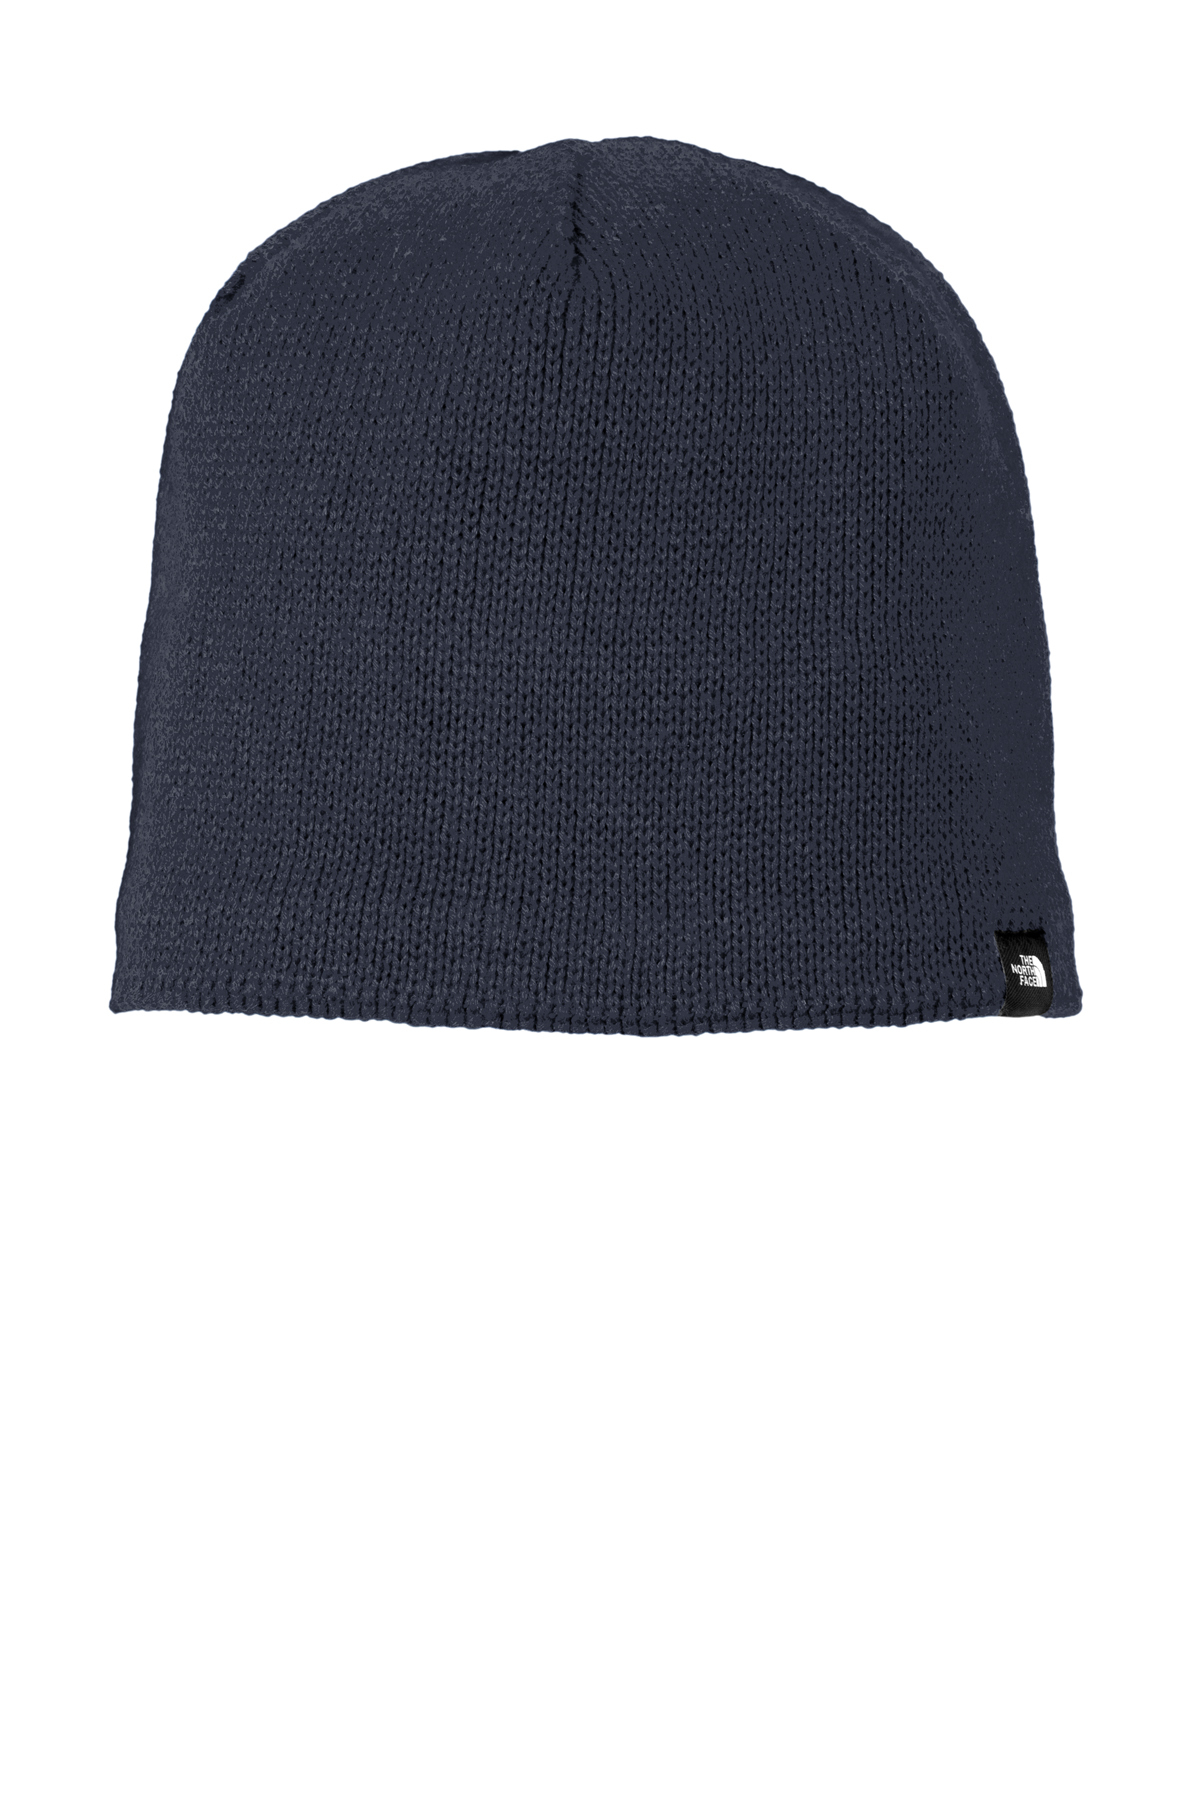 The North Face Mountain Beanie | Product | SanMar